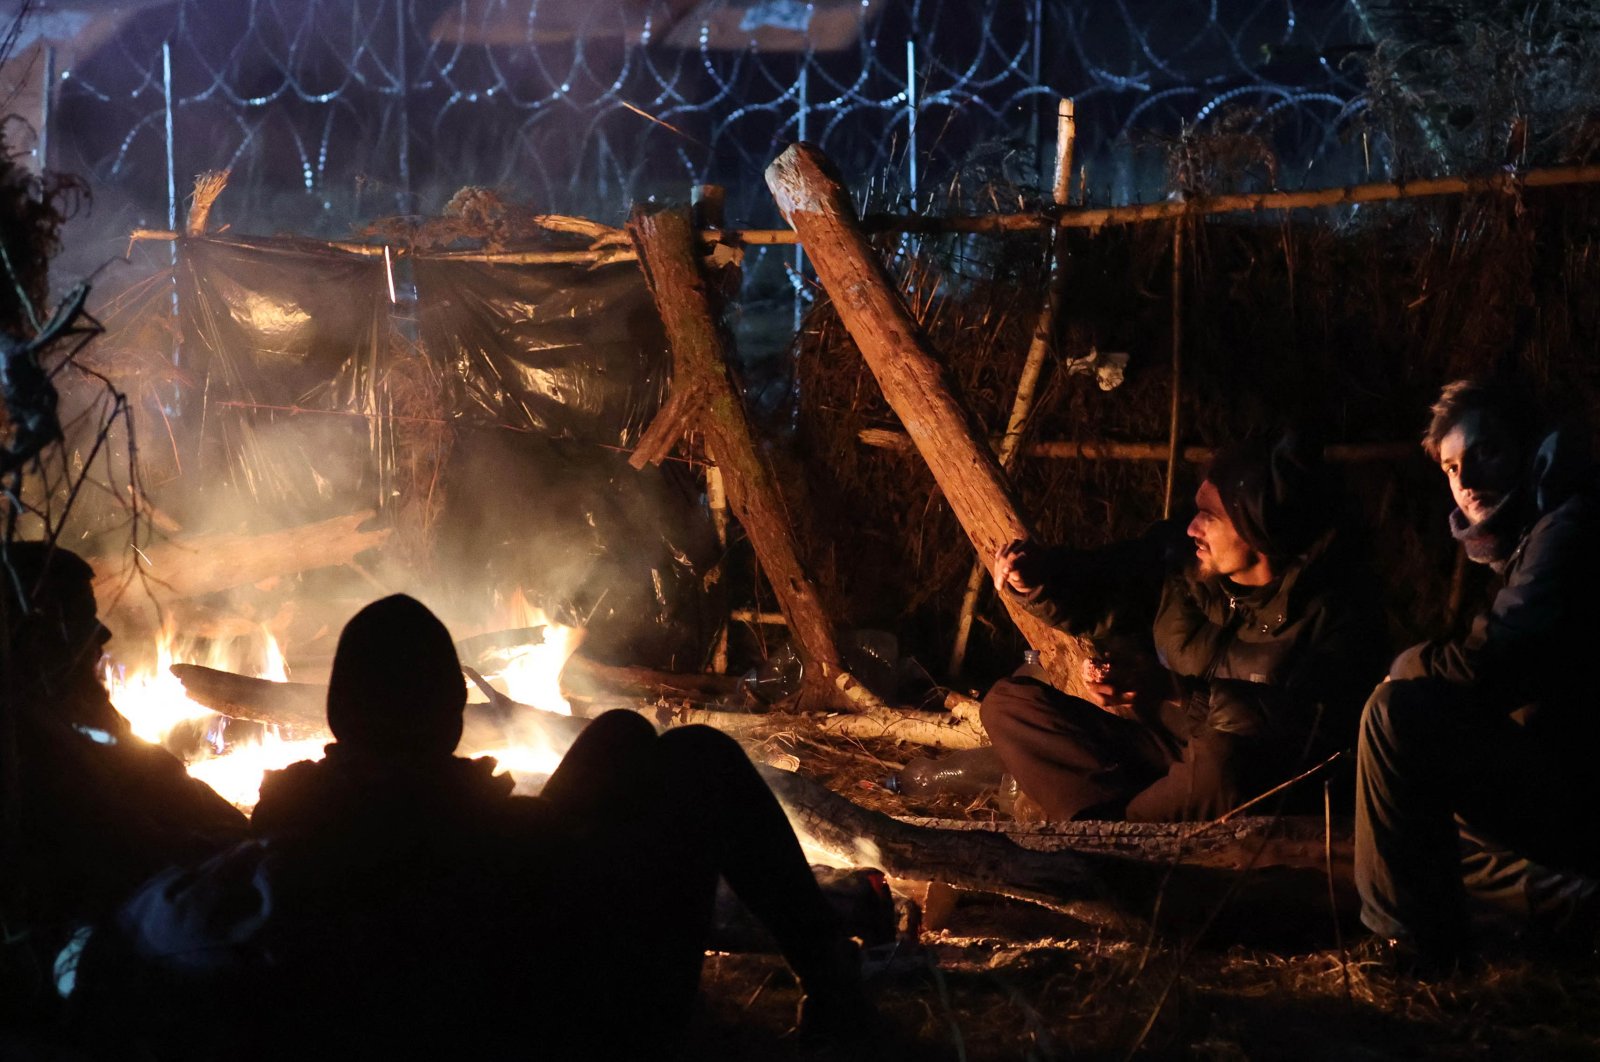 Migrants aiming to cross into Poland warm themselves by a fire on the Belarusian-Polish border in the Grodno region, Belarus, Nov. 16, 2021. (AFP Photo)